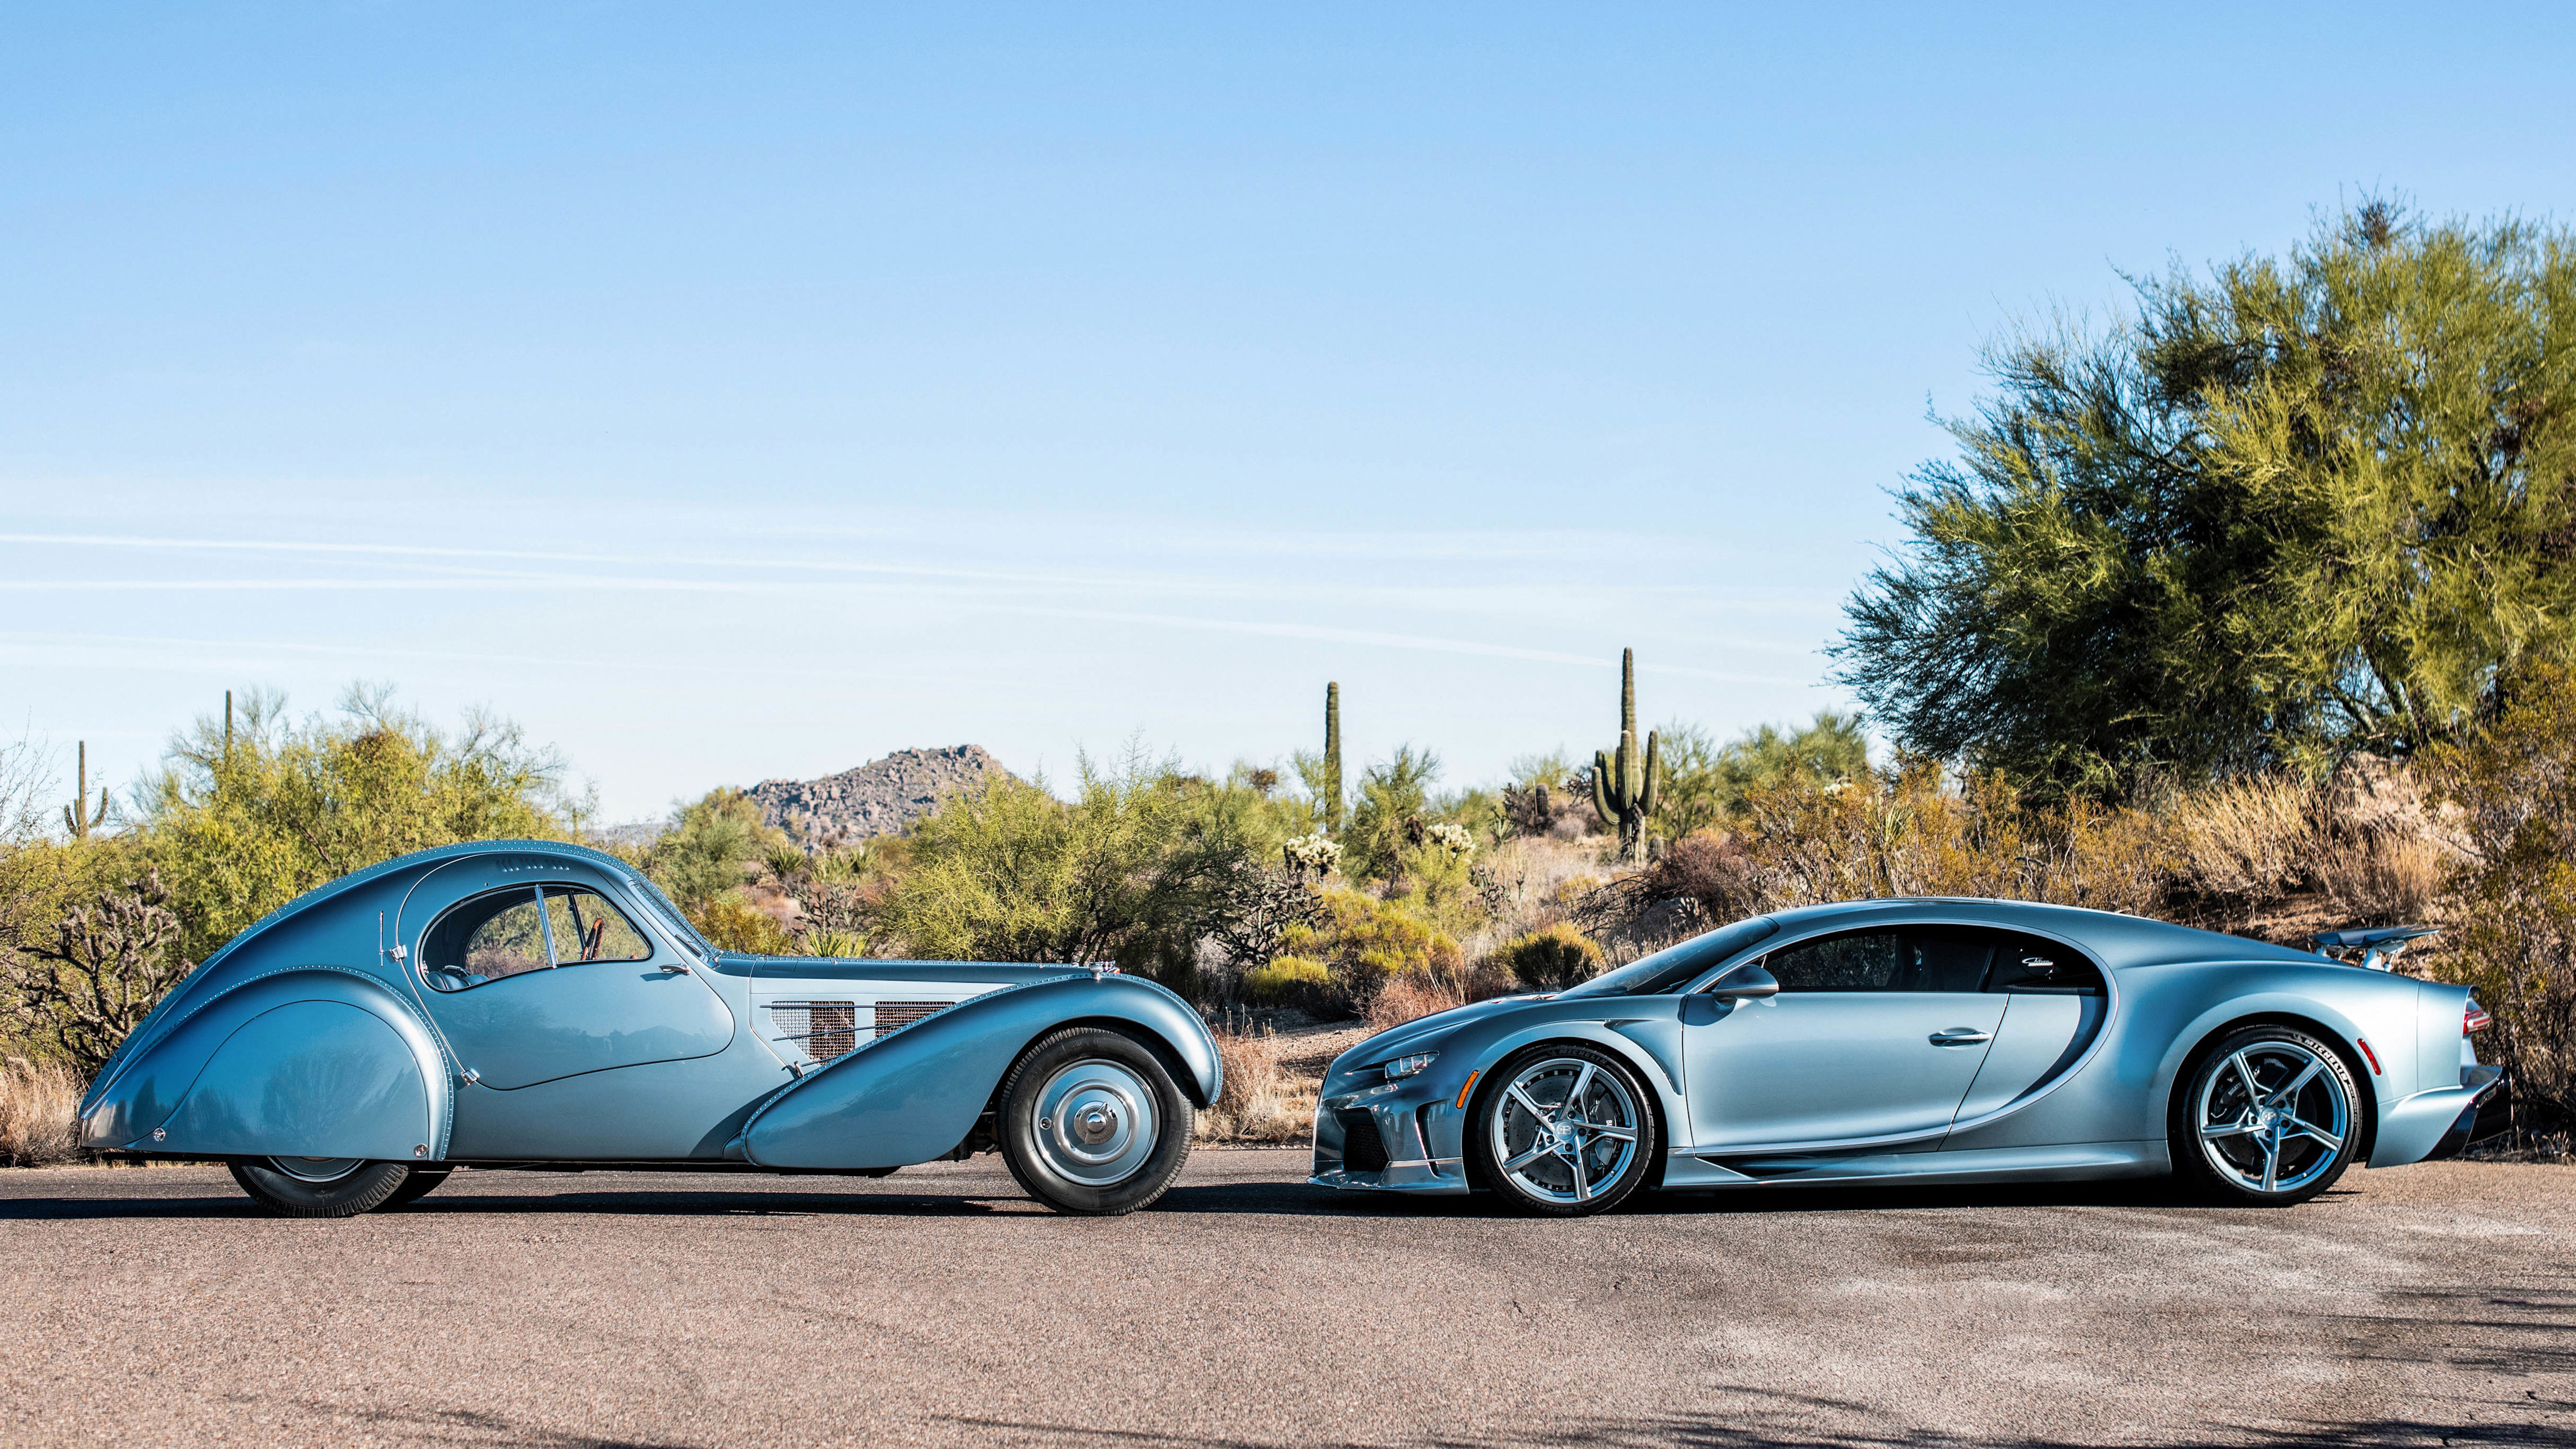 this rather lovely chiron super sport pays tribute to the bugatti type 57 sc atlantic